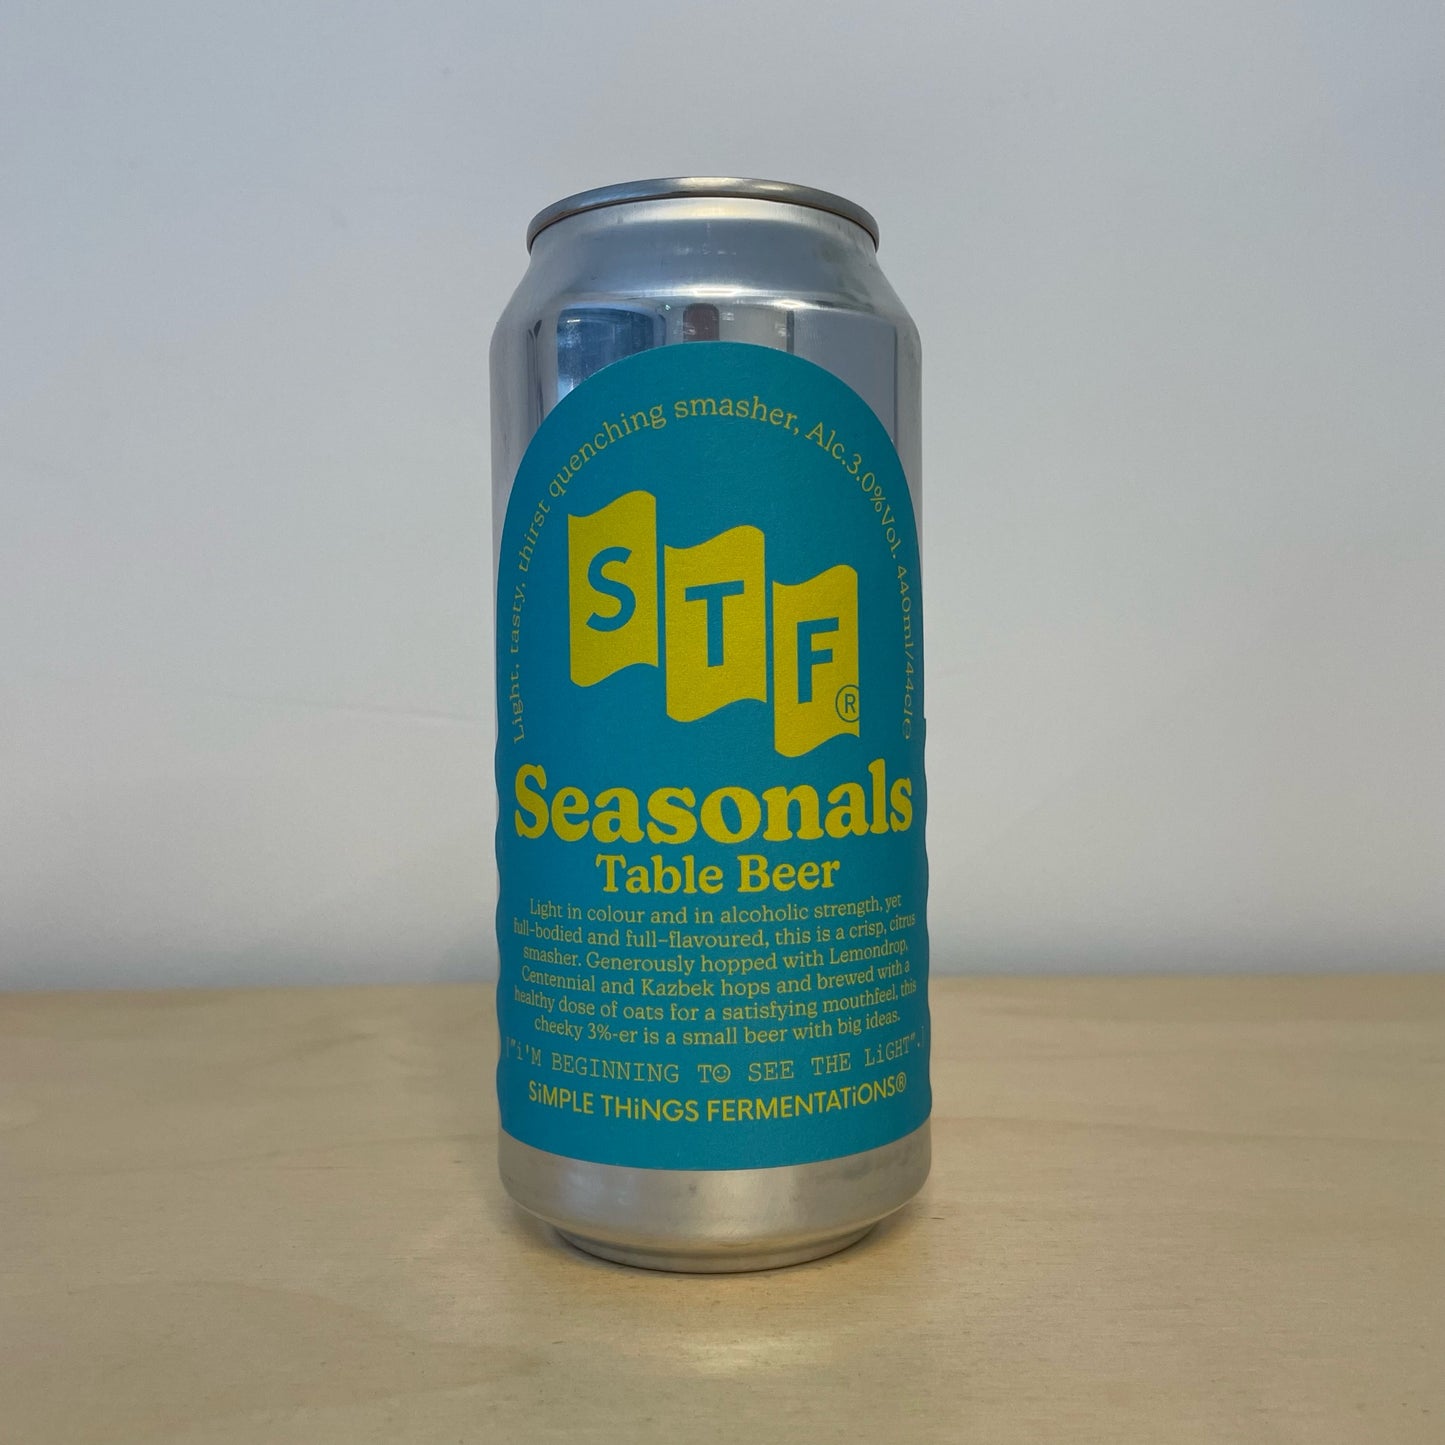 Simple Things Fermentations Table Beer (440ml Can)